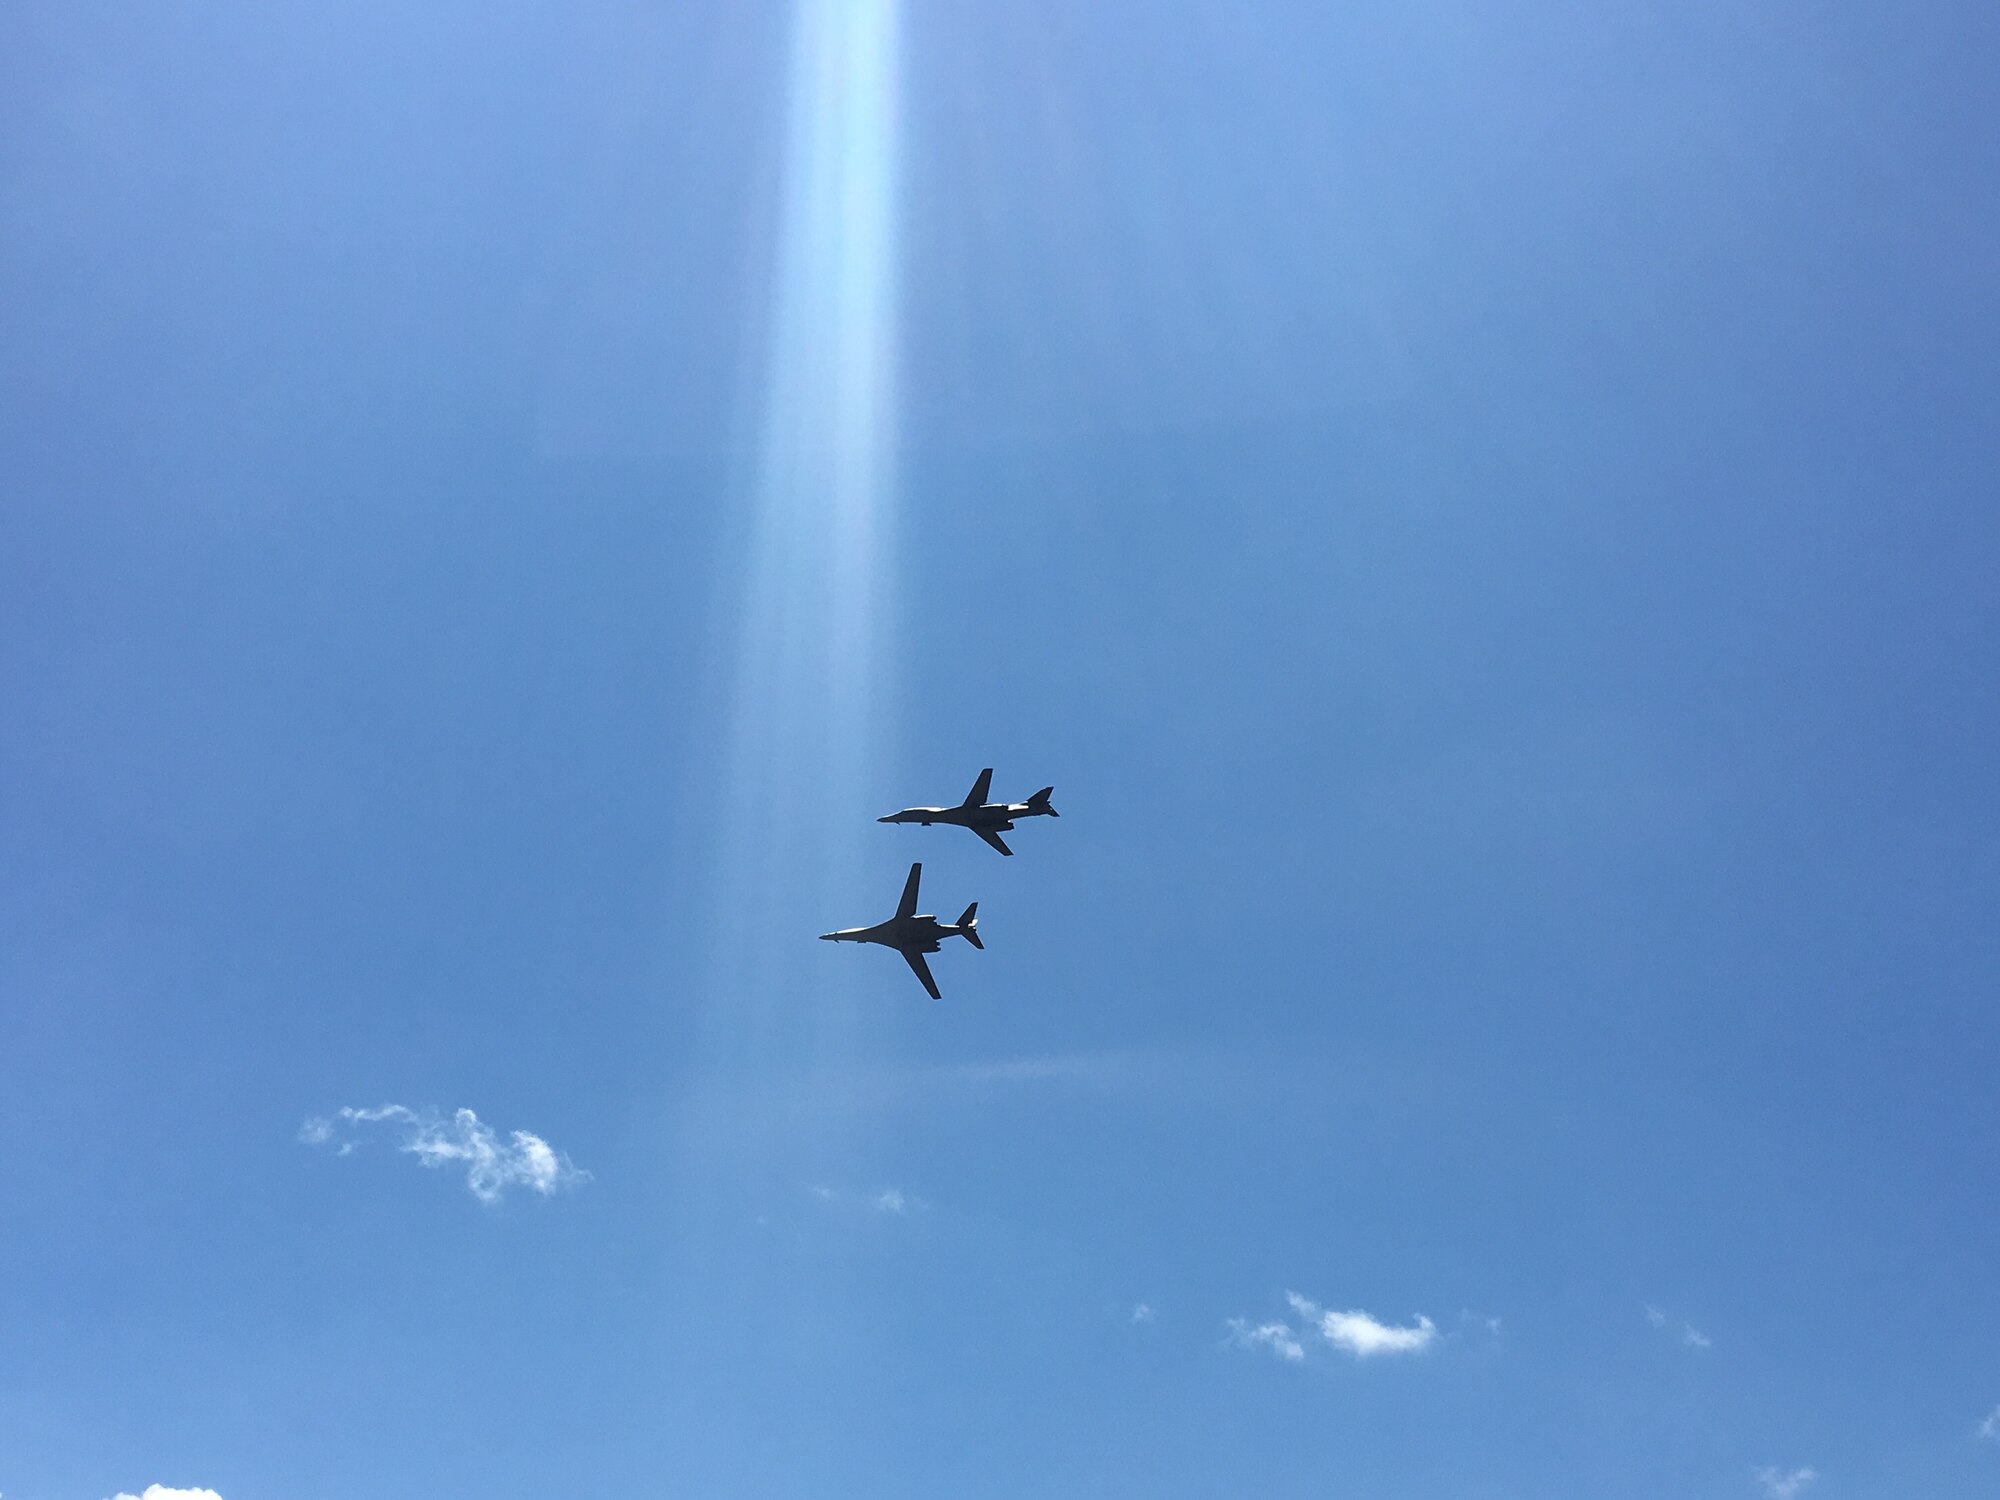 Two U.S. Air Force B-1B Lancer bomber aircraft with the 7th Bomb Wing, 9th Expeditionary Bomb Squadron from Dyess Air Force Base, Texas, currently deployed to Andersen Air Force Base in Guam, conduct a flyover during Langkawi International Maritime and Aerospace Exhibition (LIMA) 2017, Langkawi Island, Malaysia, March 21, 2017. LIMA is the premier aerospace and maritime exhibition in Malaysia. The biennial event helps grow military-to-military relationship between participants. The B-1 is a highly versatile, multi-mission weapon system that can rapidly deliver massive quantities of precision and non-precision weapons against any adversary. The B-1 is a key component to improving both joint service and ally interoperability. The rotation of this aircraft supports U.S. Pacific Command’s Continuous Bomber Presence, and is specifically designed to demonstrate the commitment of the U.S. to the Indo-Asia-Pacific region and regional security. (U.S. Air Force photo by Capt. Jessica Clark)